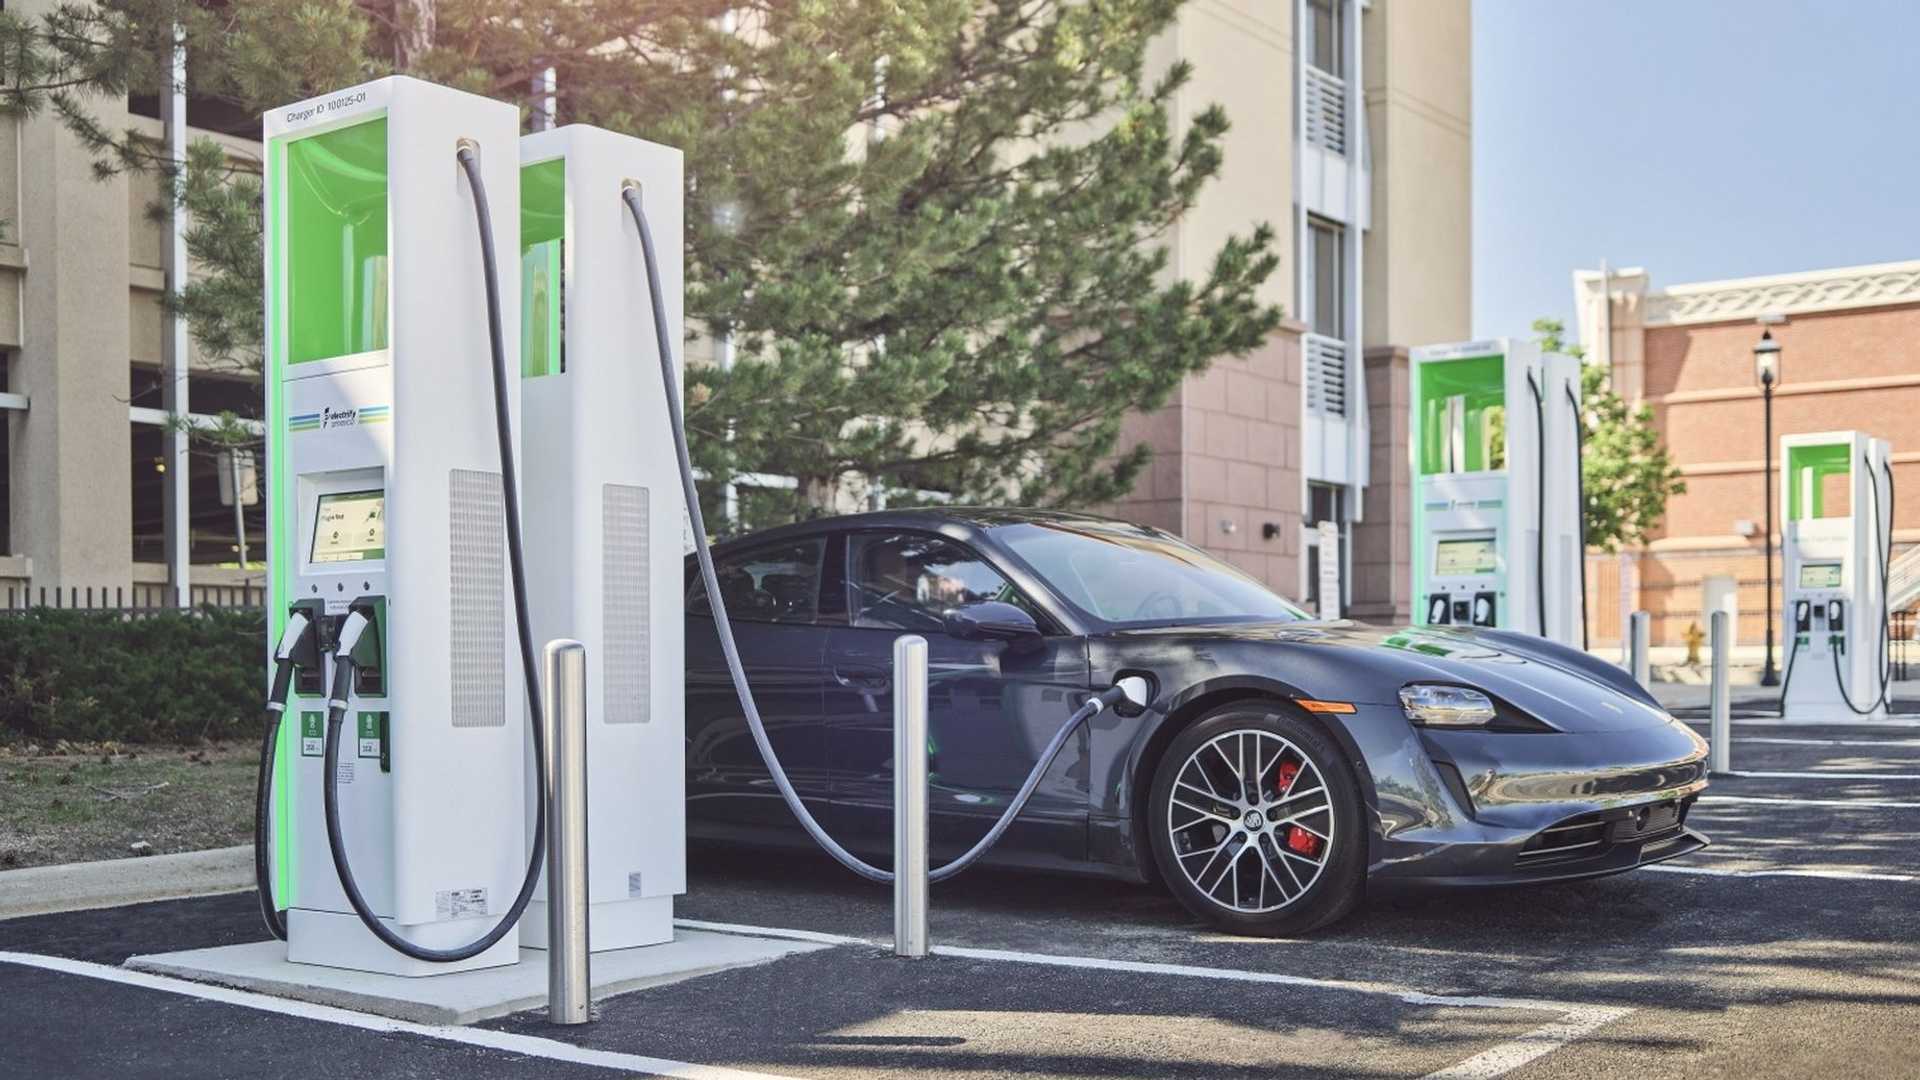 electrify america is completely changing its pricing structure